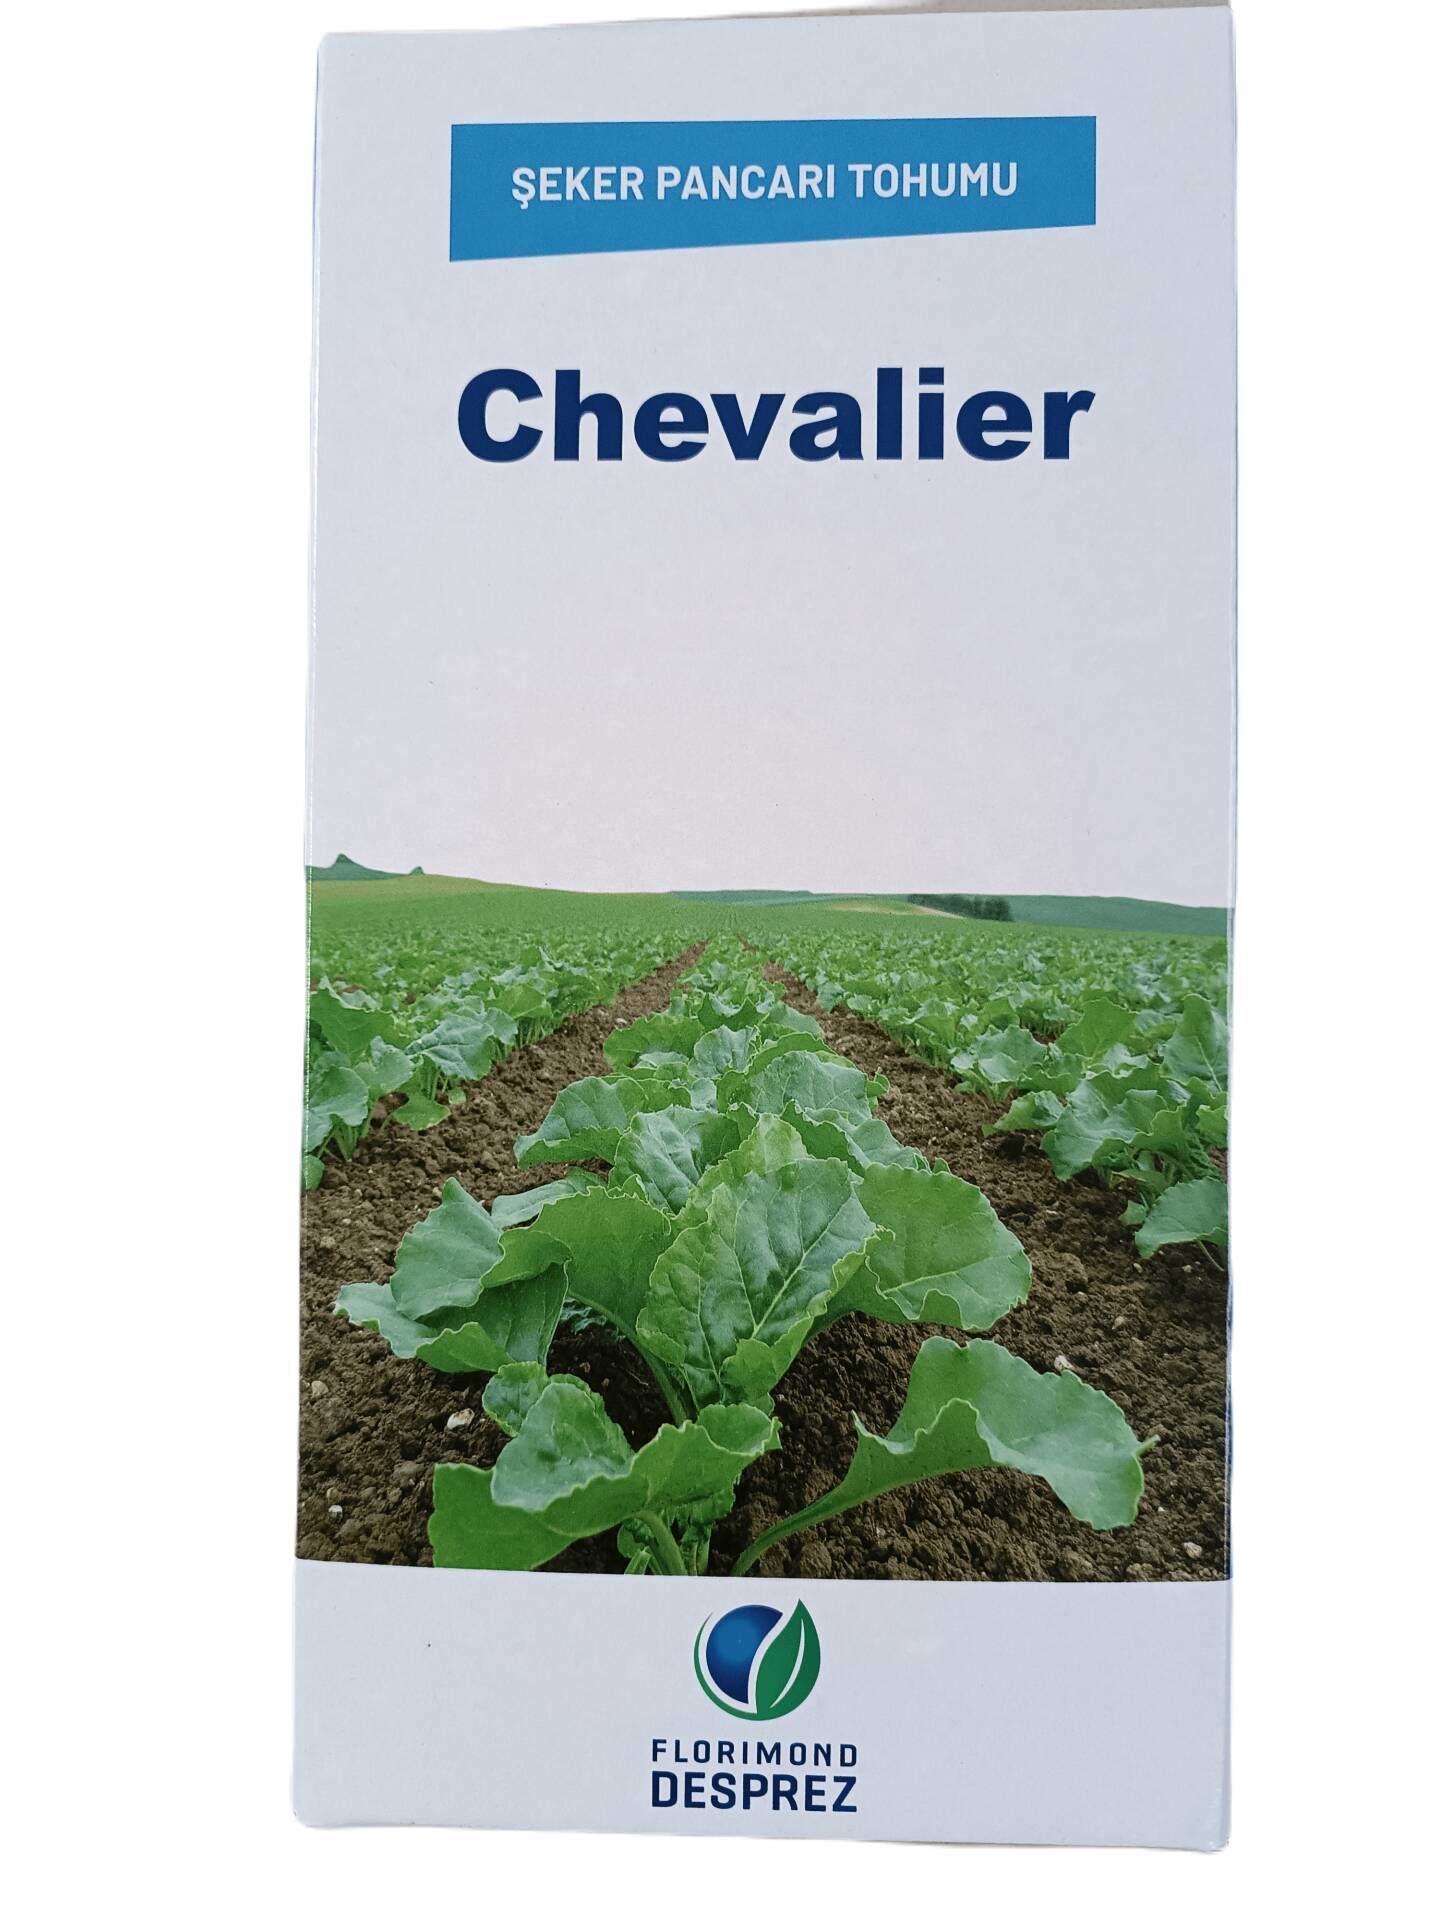 Chevalier Sugar Beet Seed Coated Medicated - 100,000 Pieces